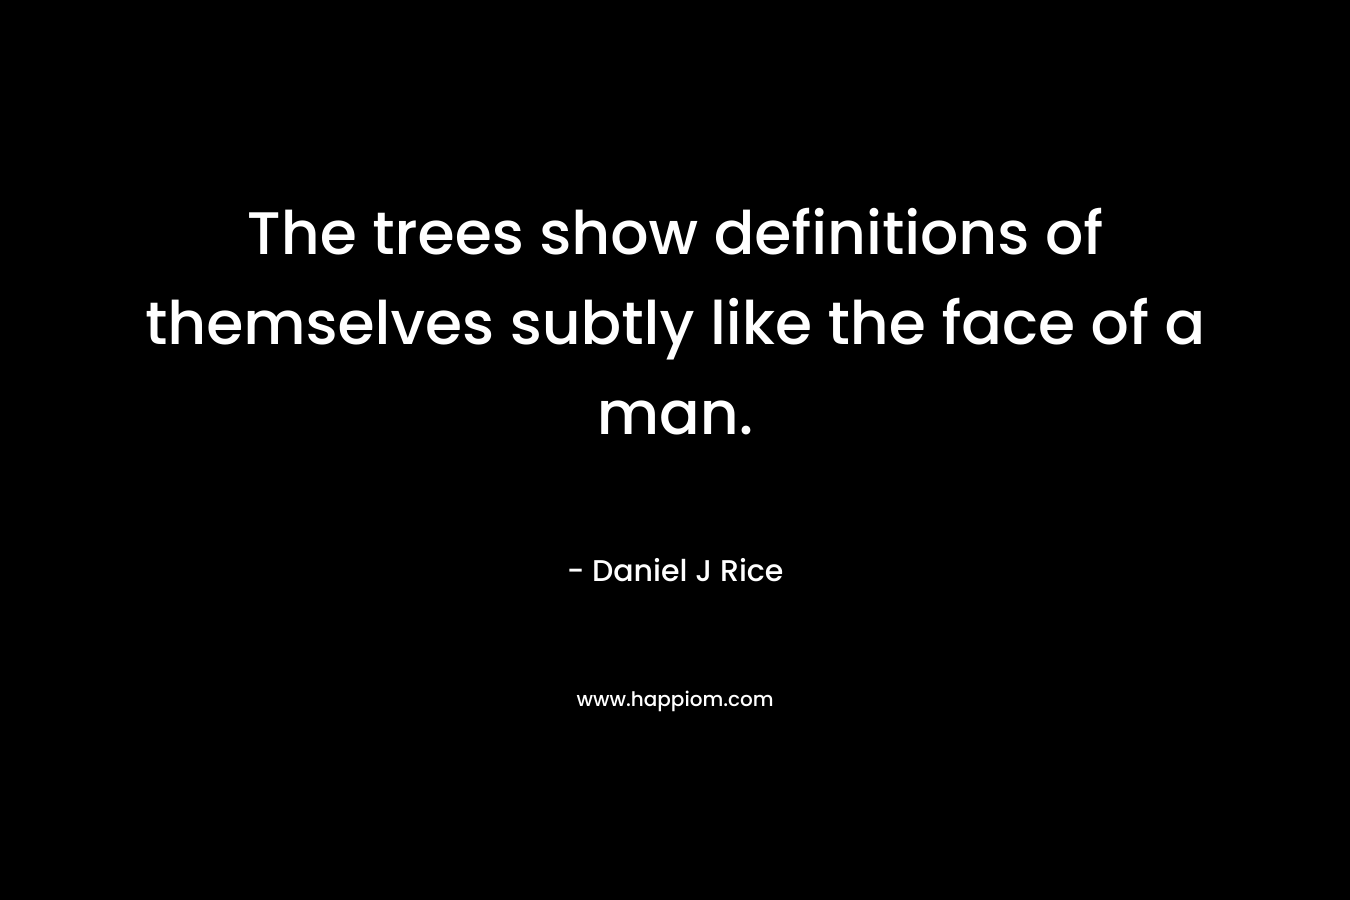 The trees show definitions of themselves subtly like the face of a man.